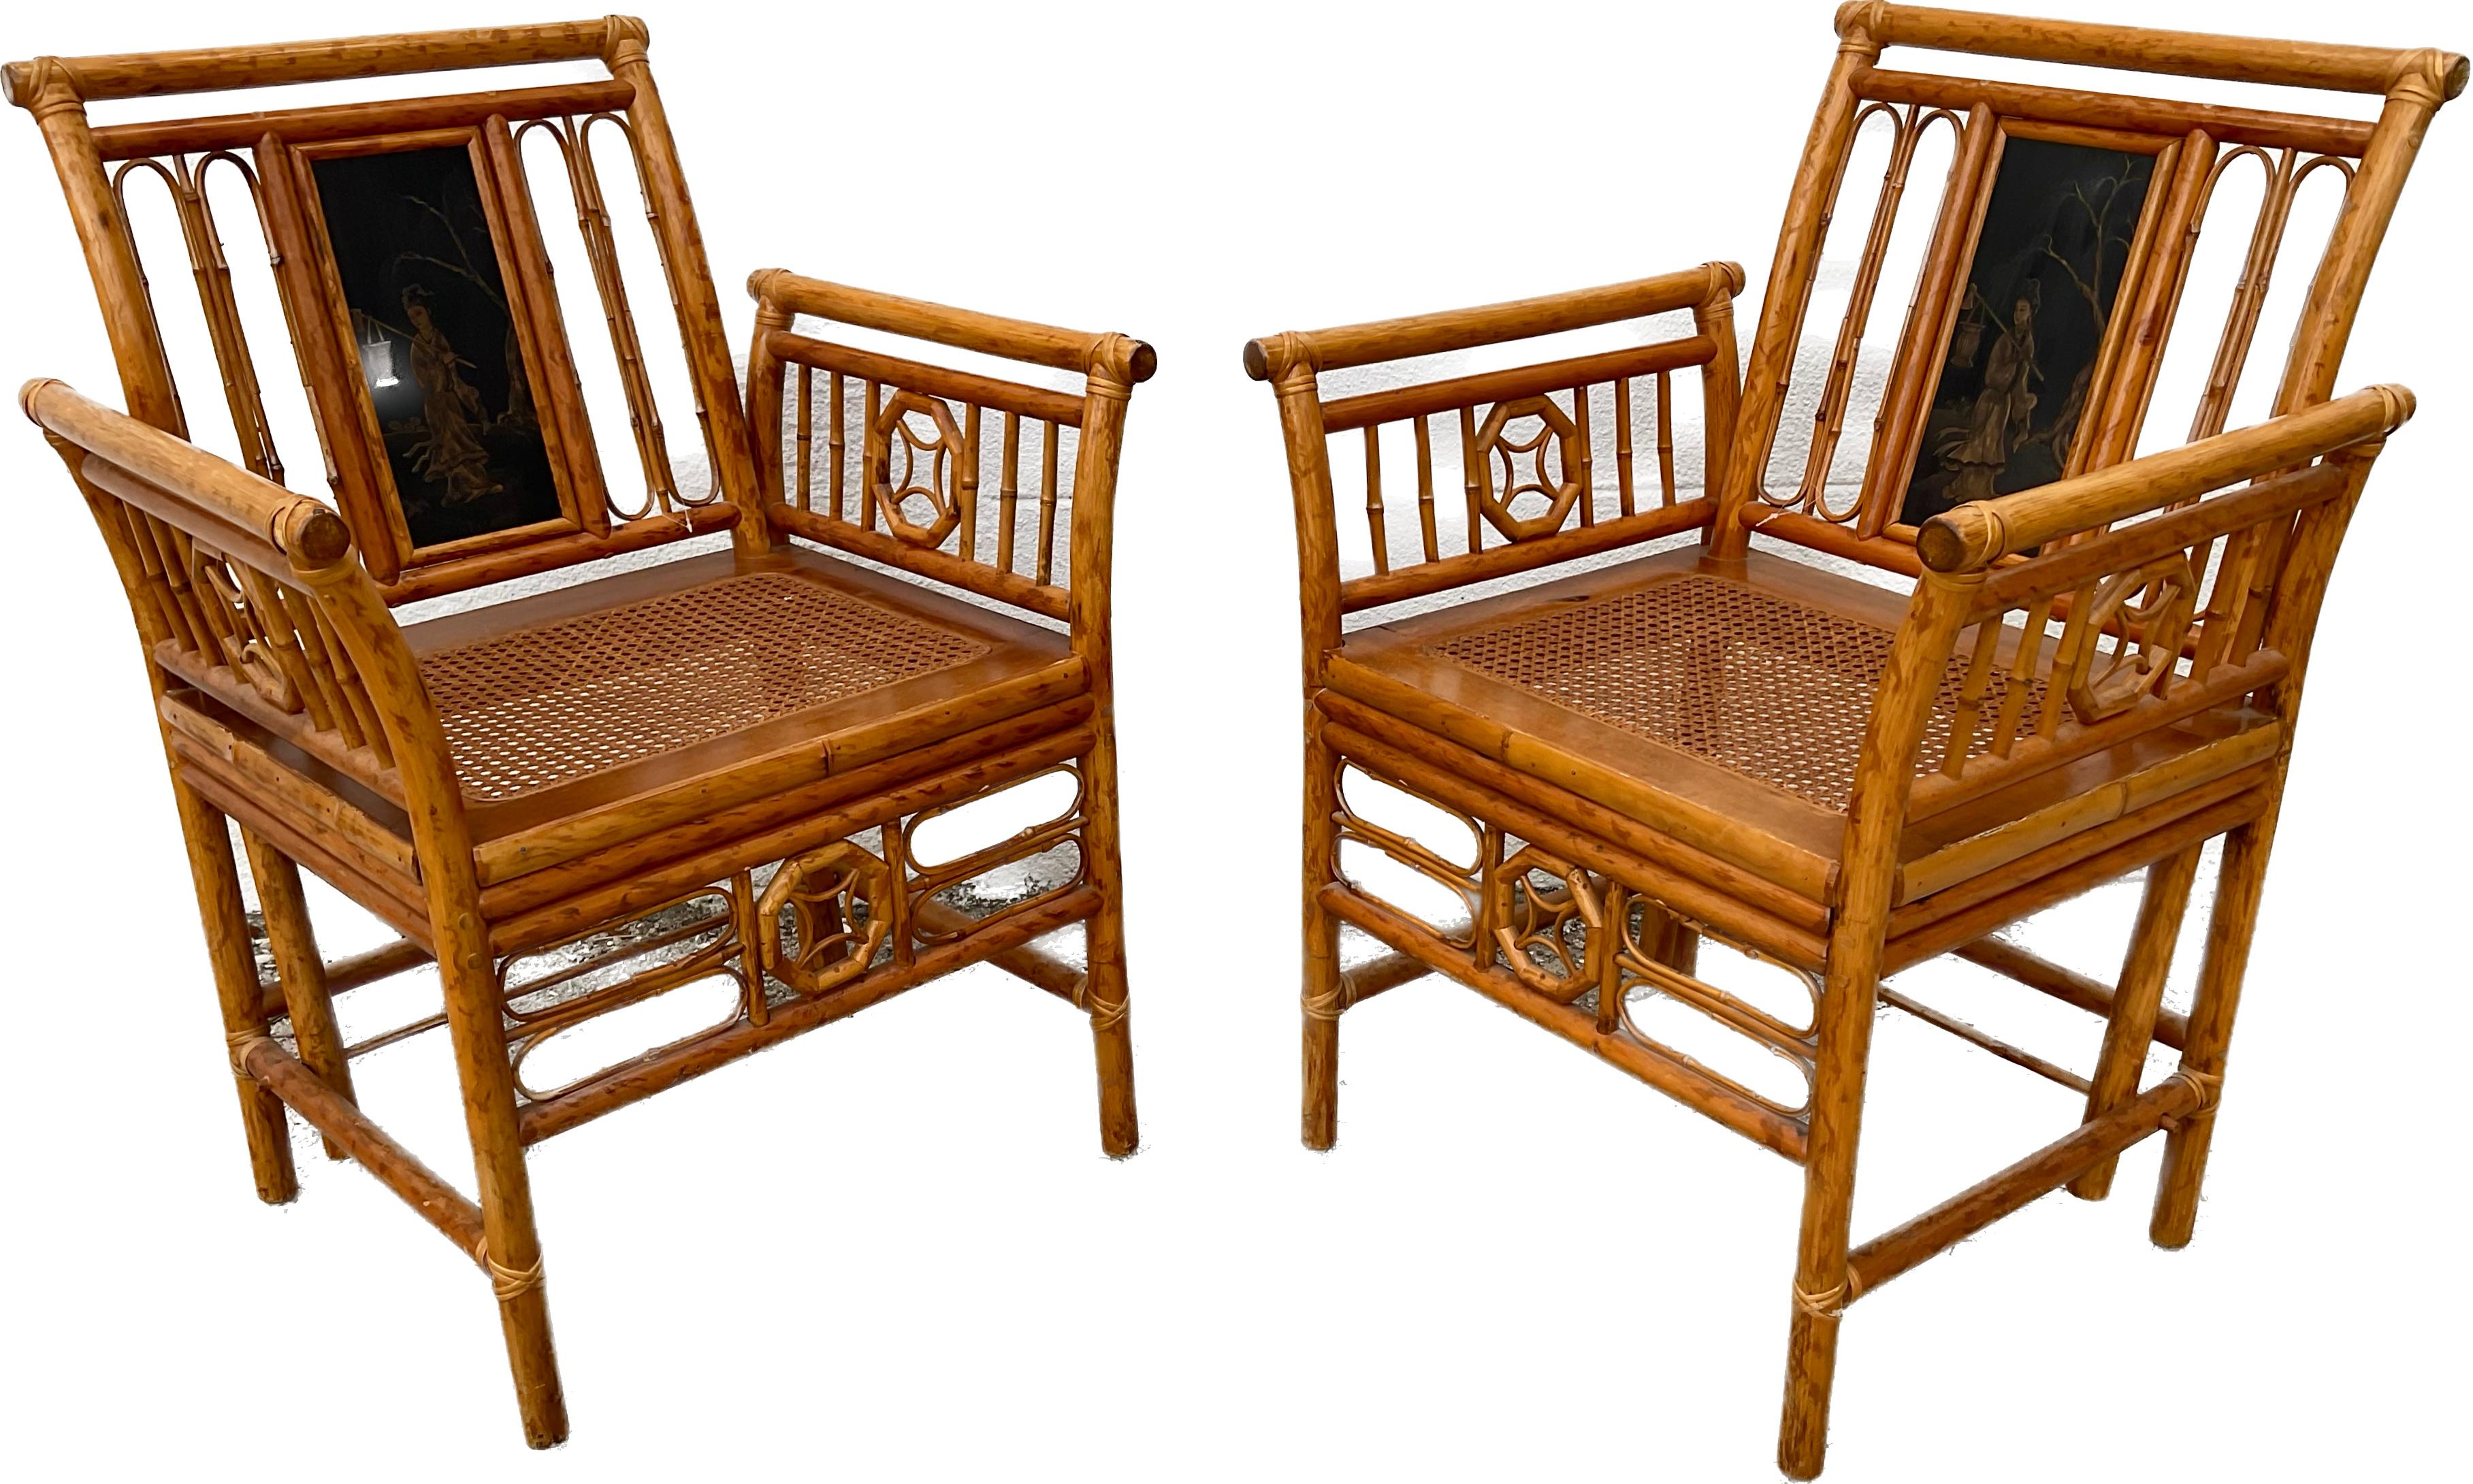 Unique pair of Chinese Chippendale bamboo chairs with an inset on inside back panel of each chair. Inset features a beautiful ebony Chinese Coromandel panel.